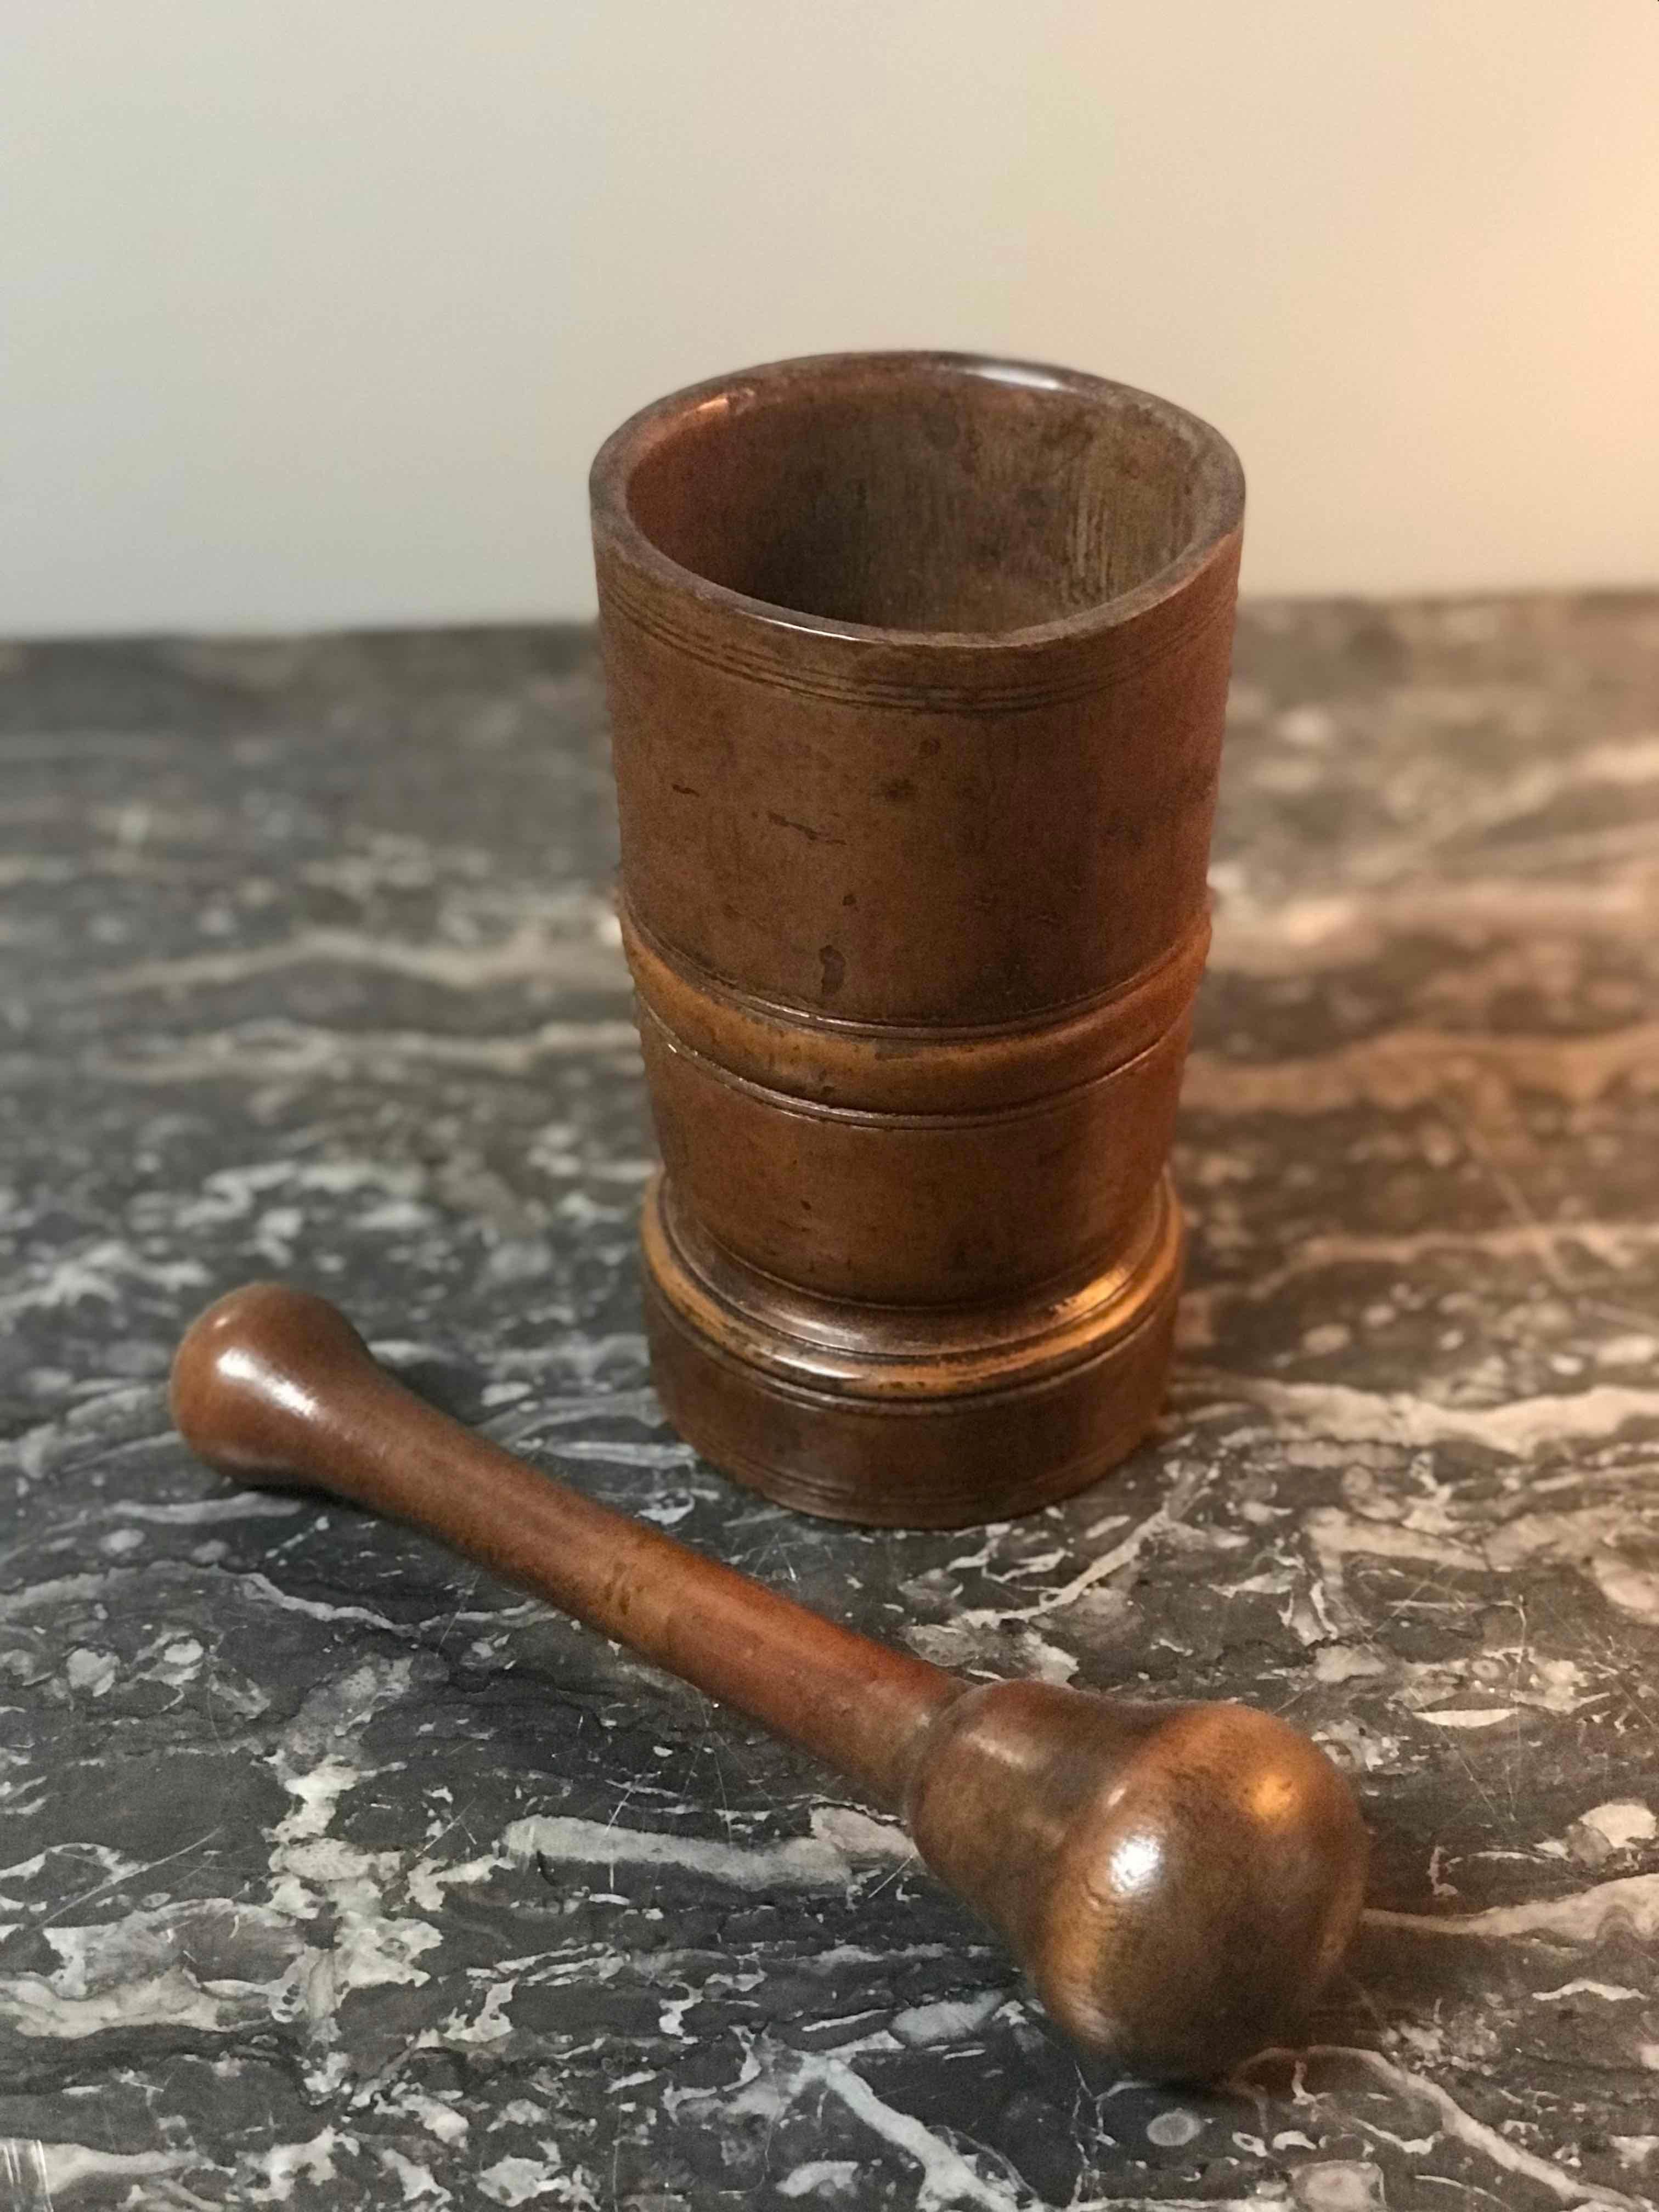 Late Victorian A Late 19th Century Wooden Mortar and Pestle